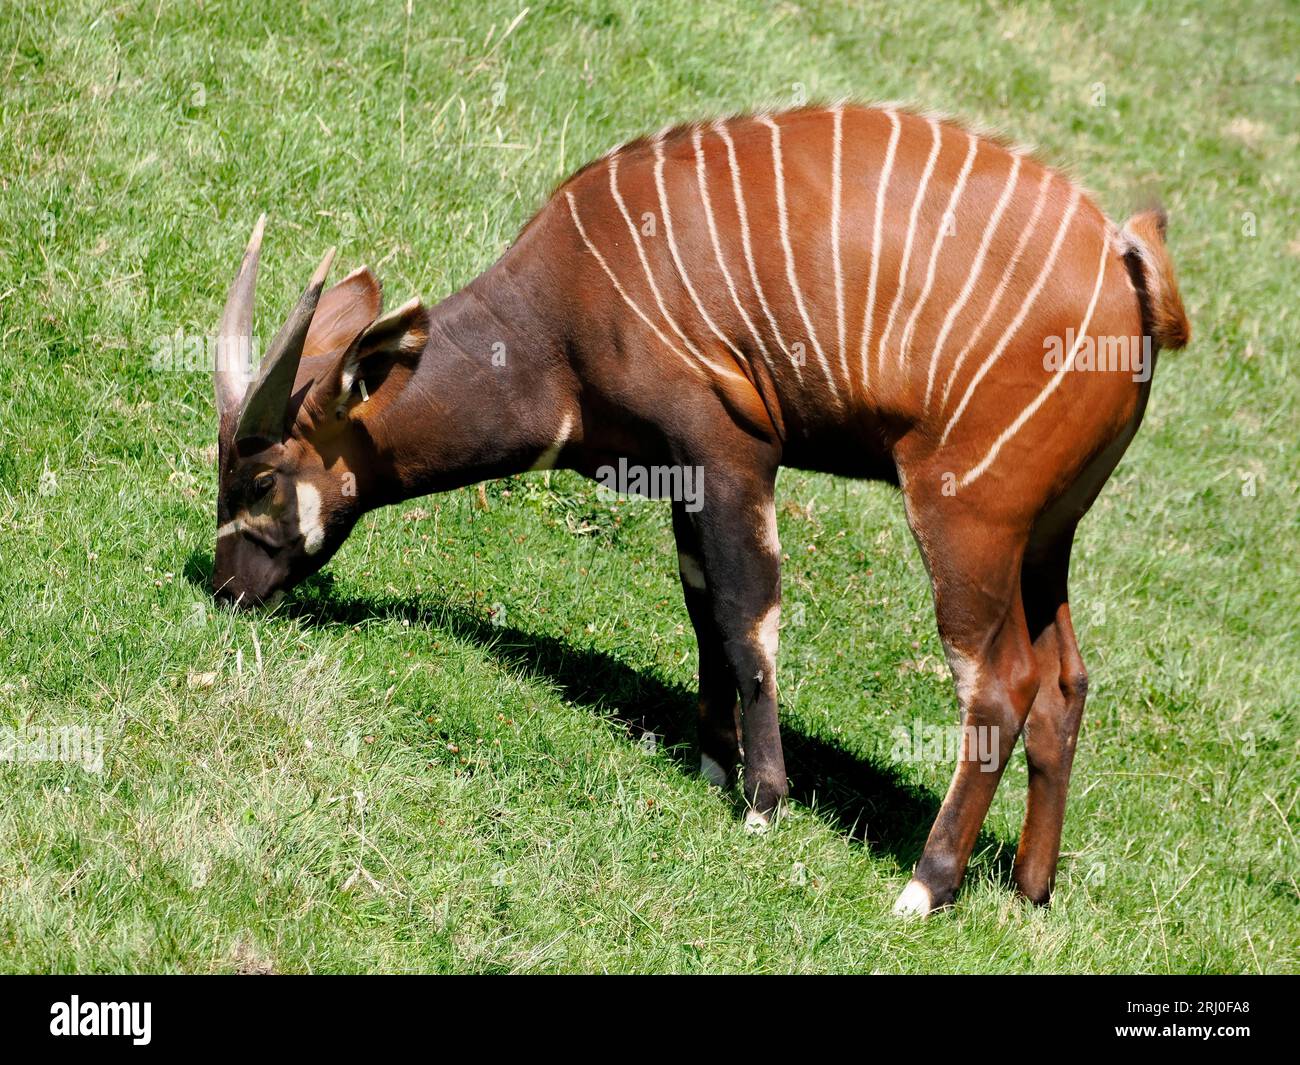 Closeup of Bongo (Tragelaphus eurycerus) eating grass and seen from profile Stock Photo